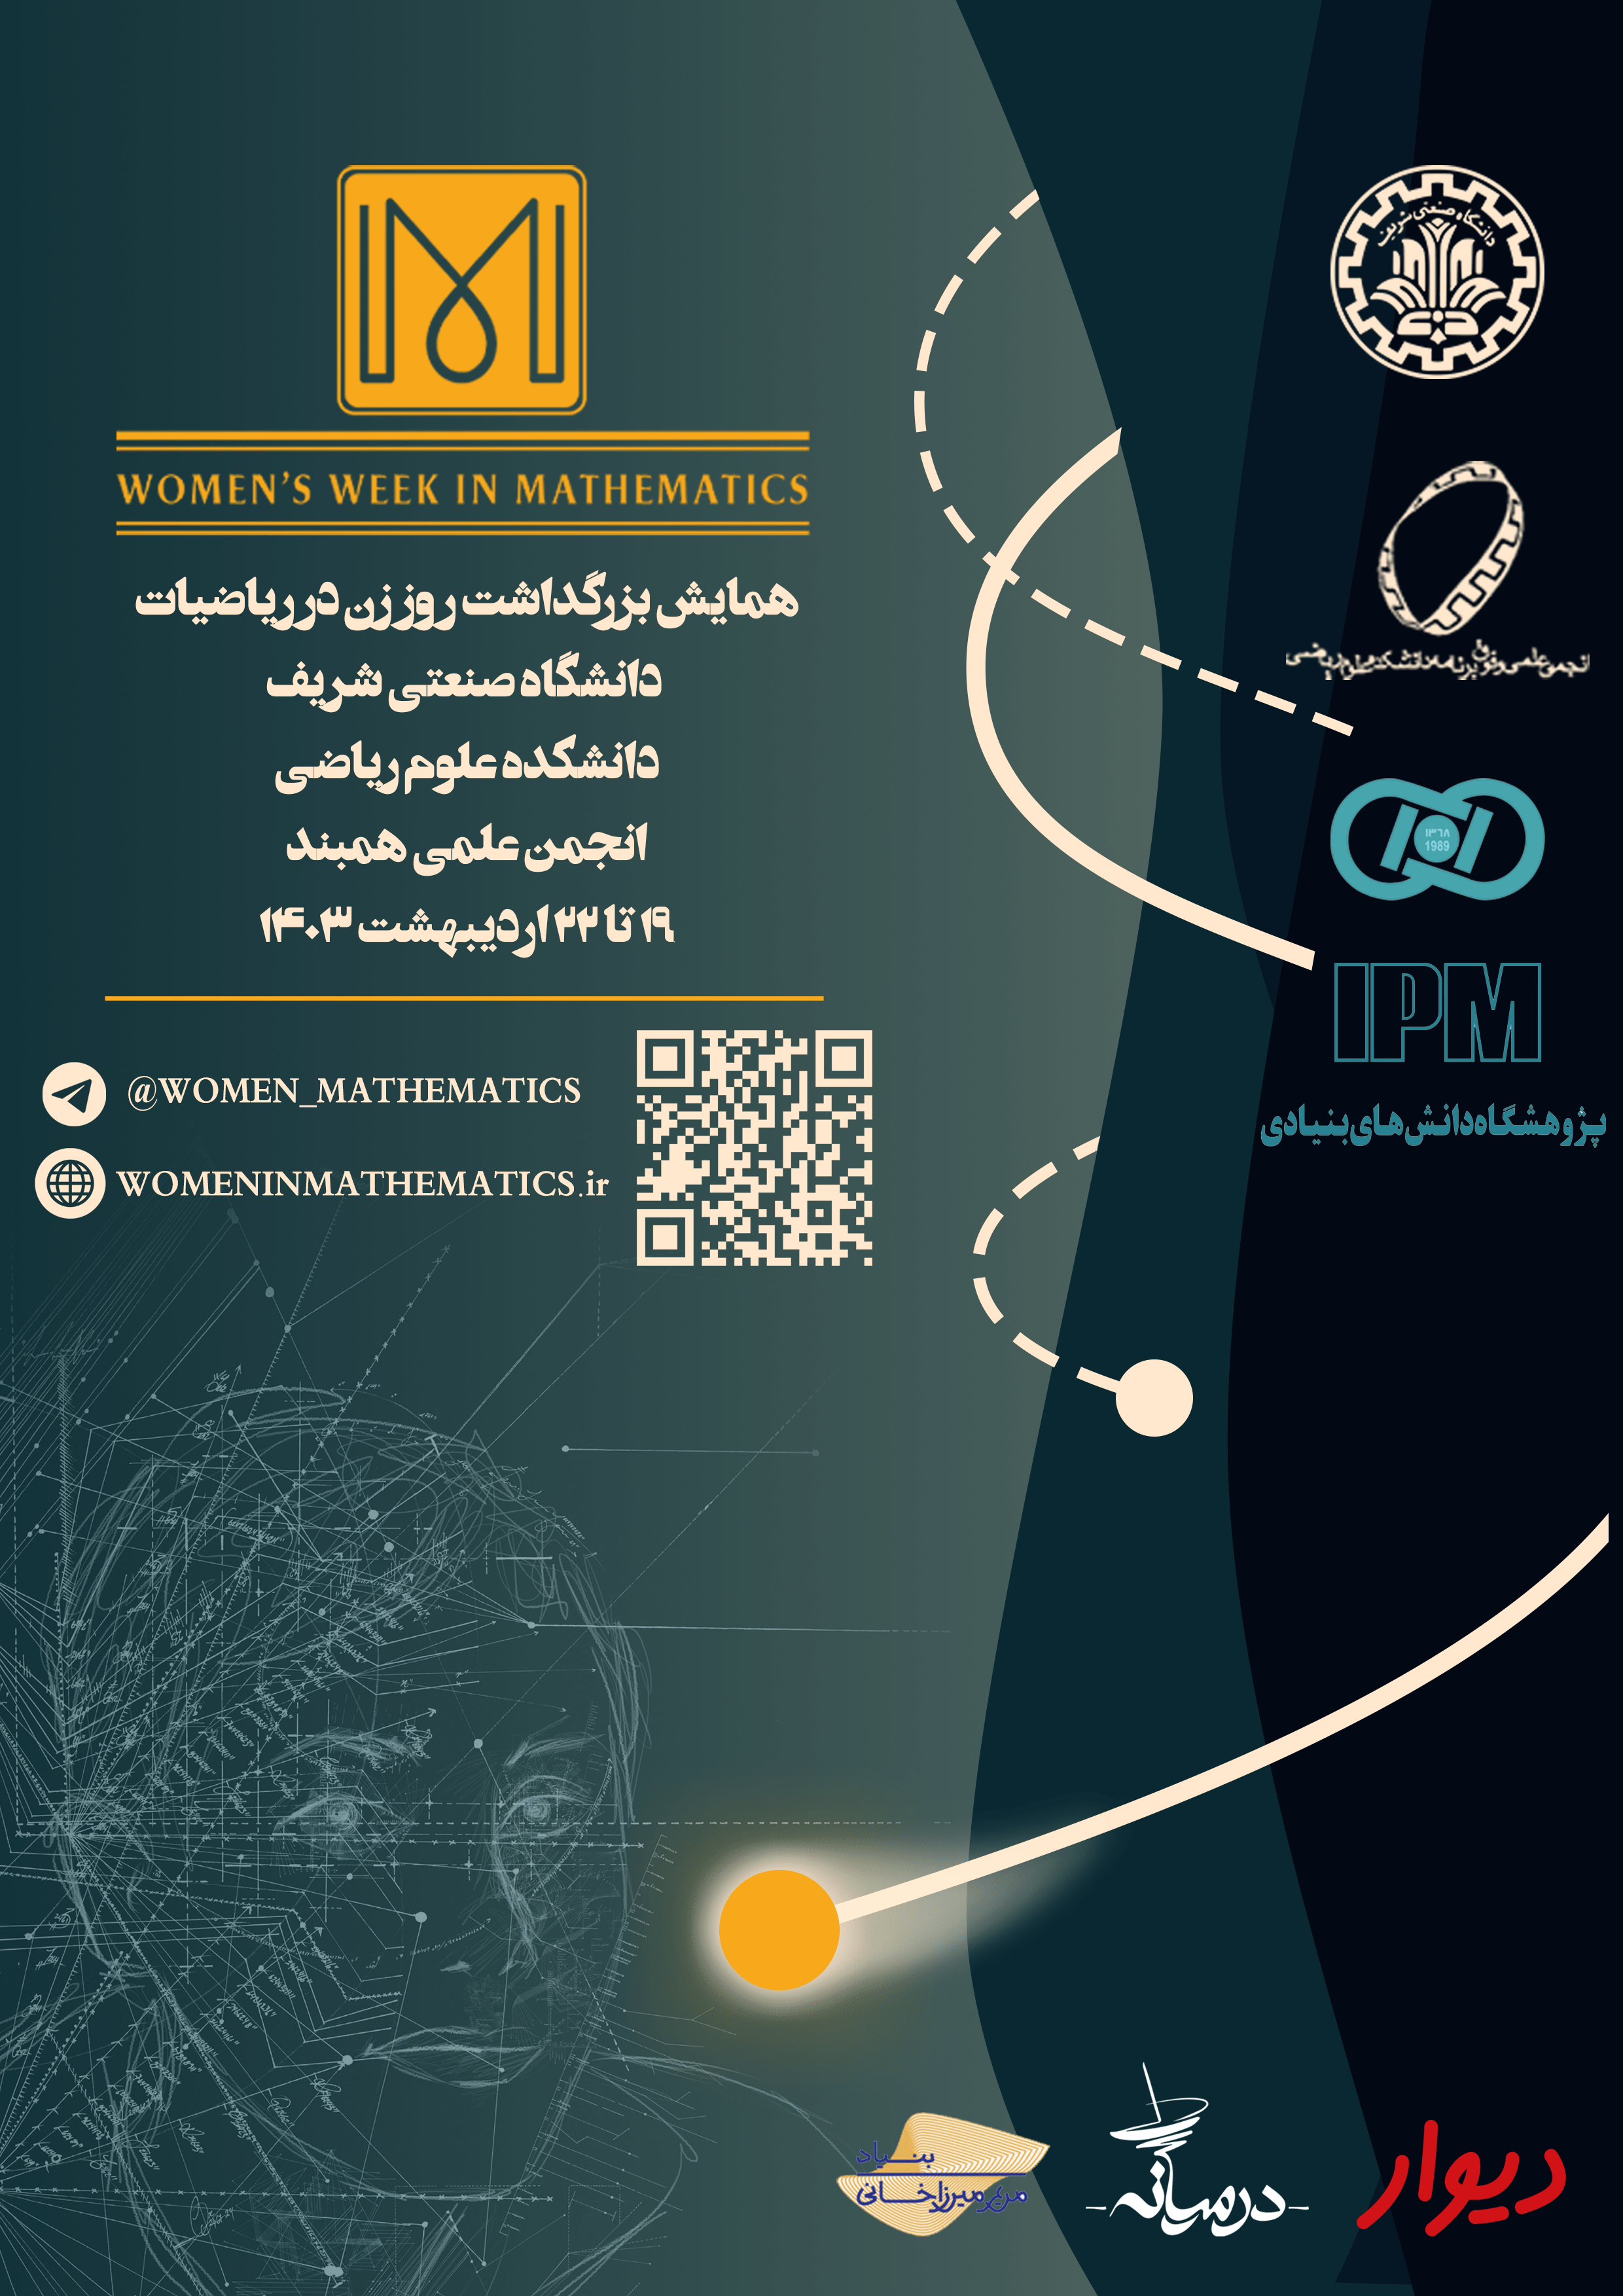 The poster of the Women's Week In Mathematics event